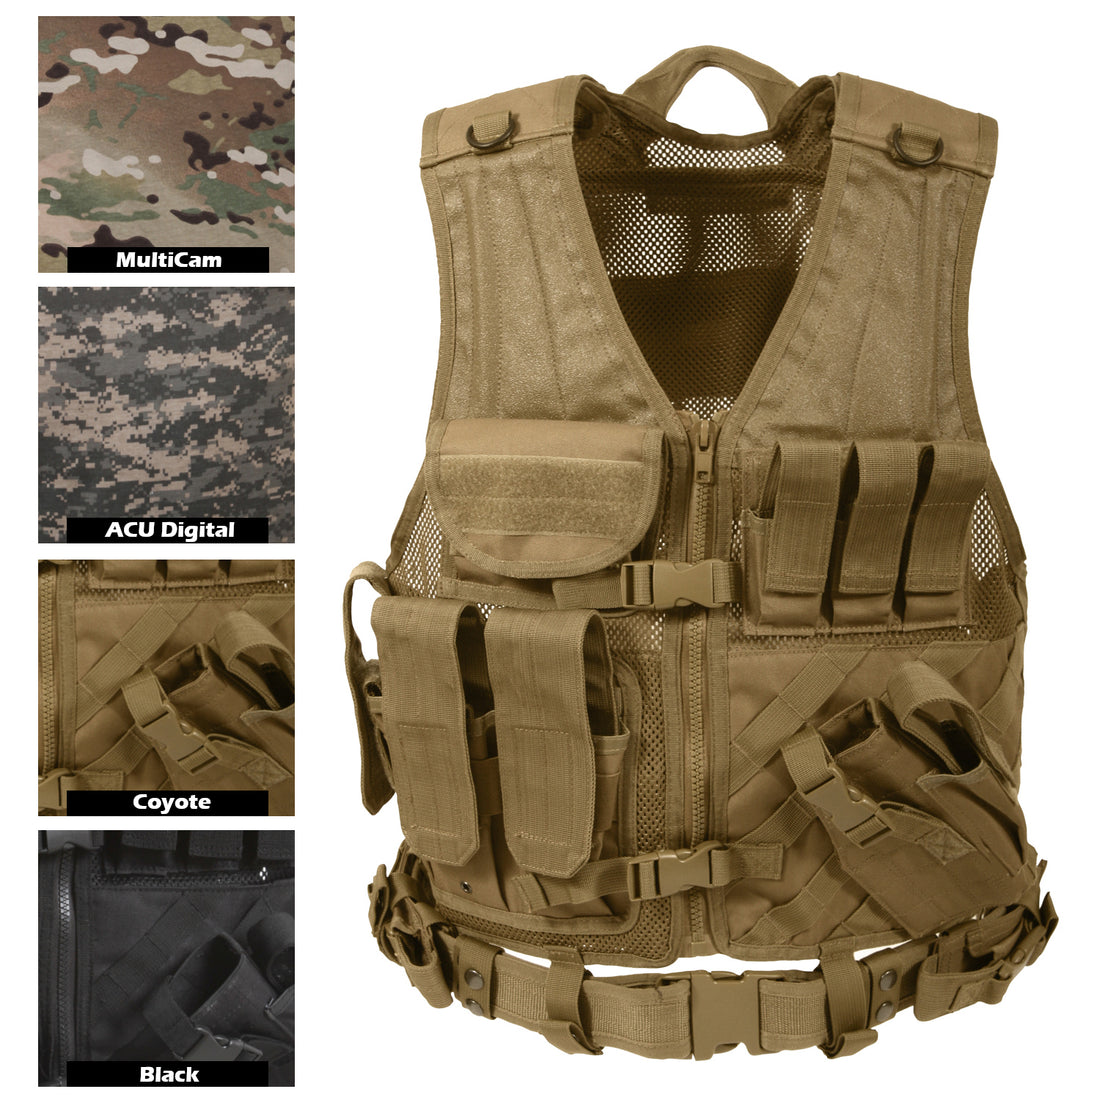 Rothco's Cross Draw MOLLE Tactical Vest